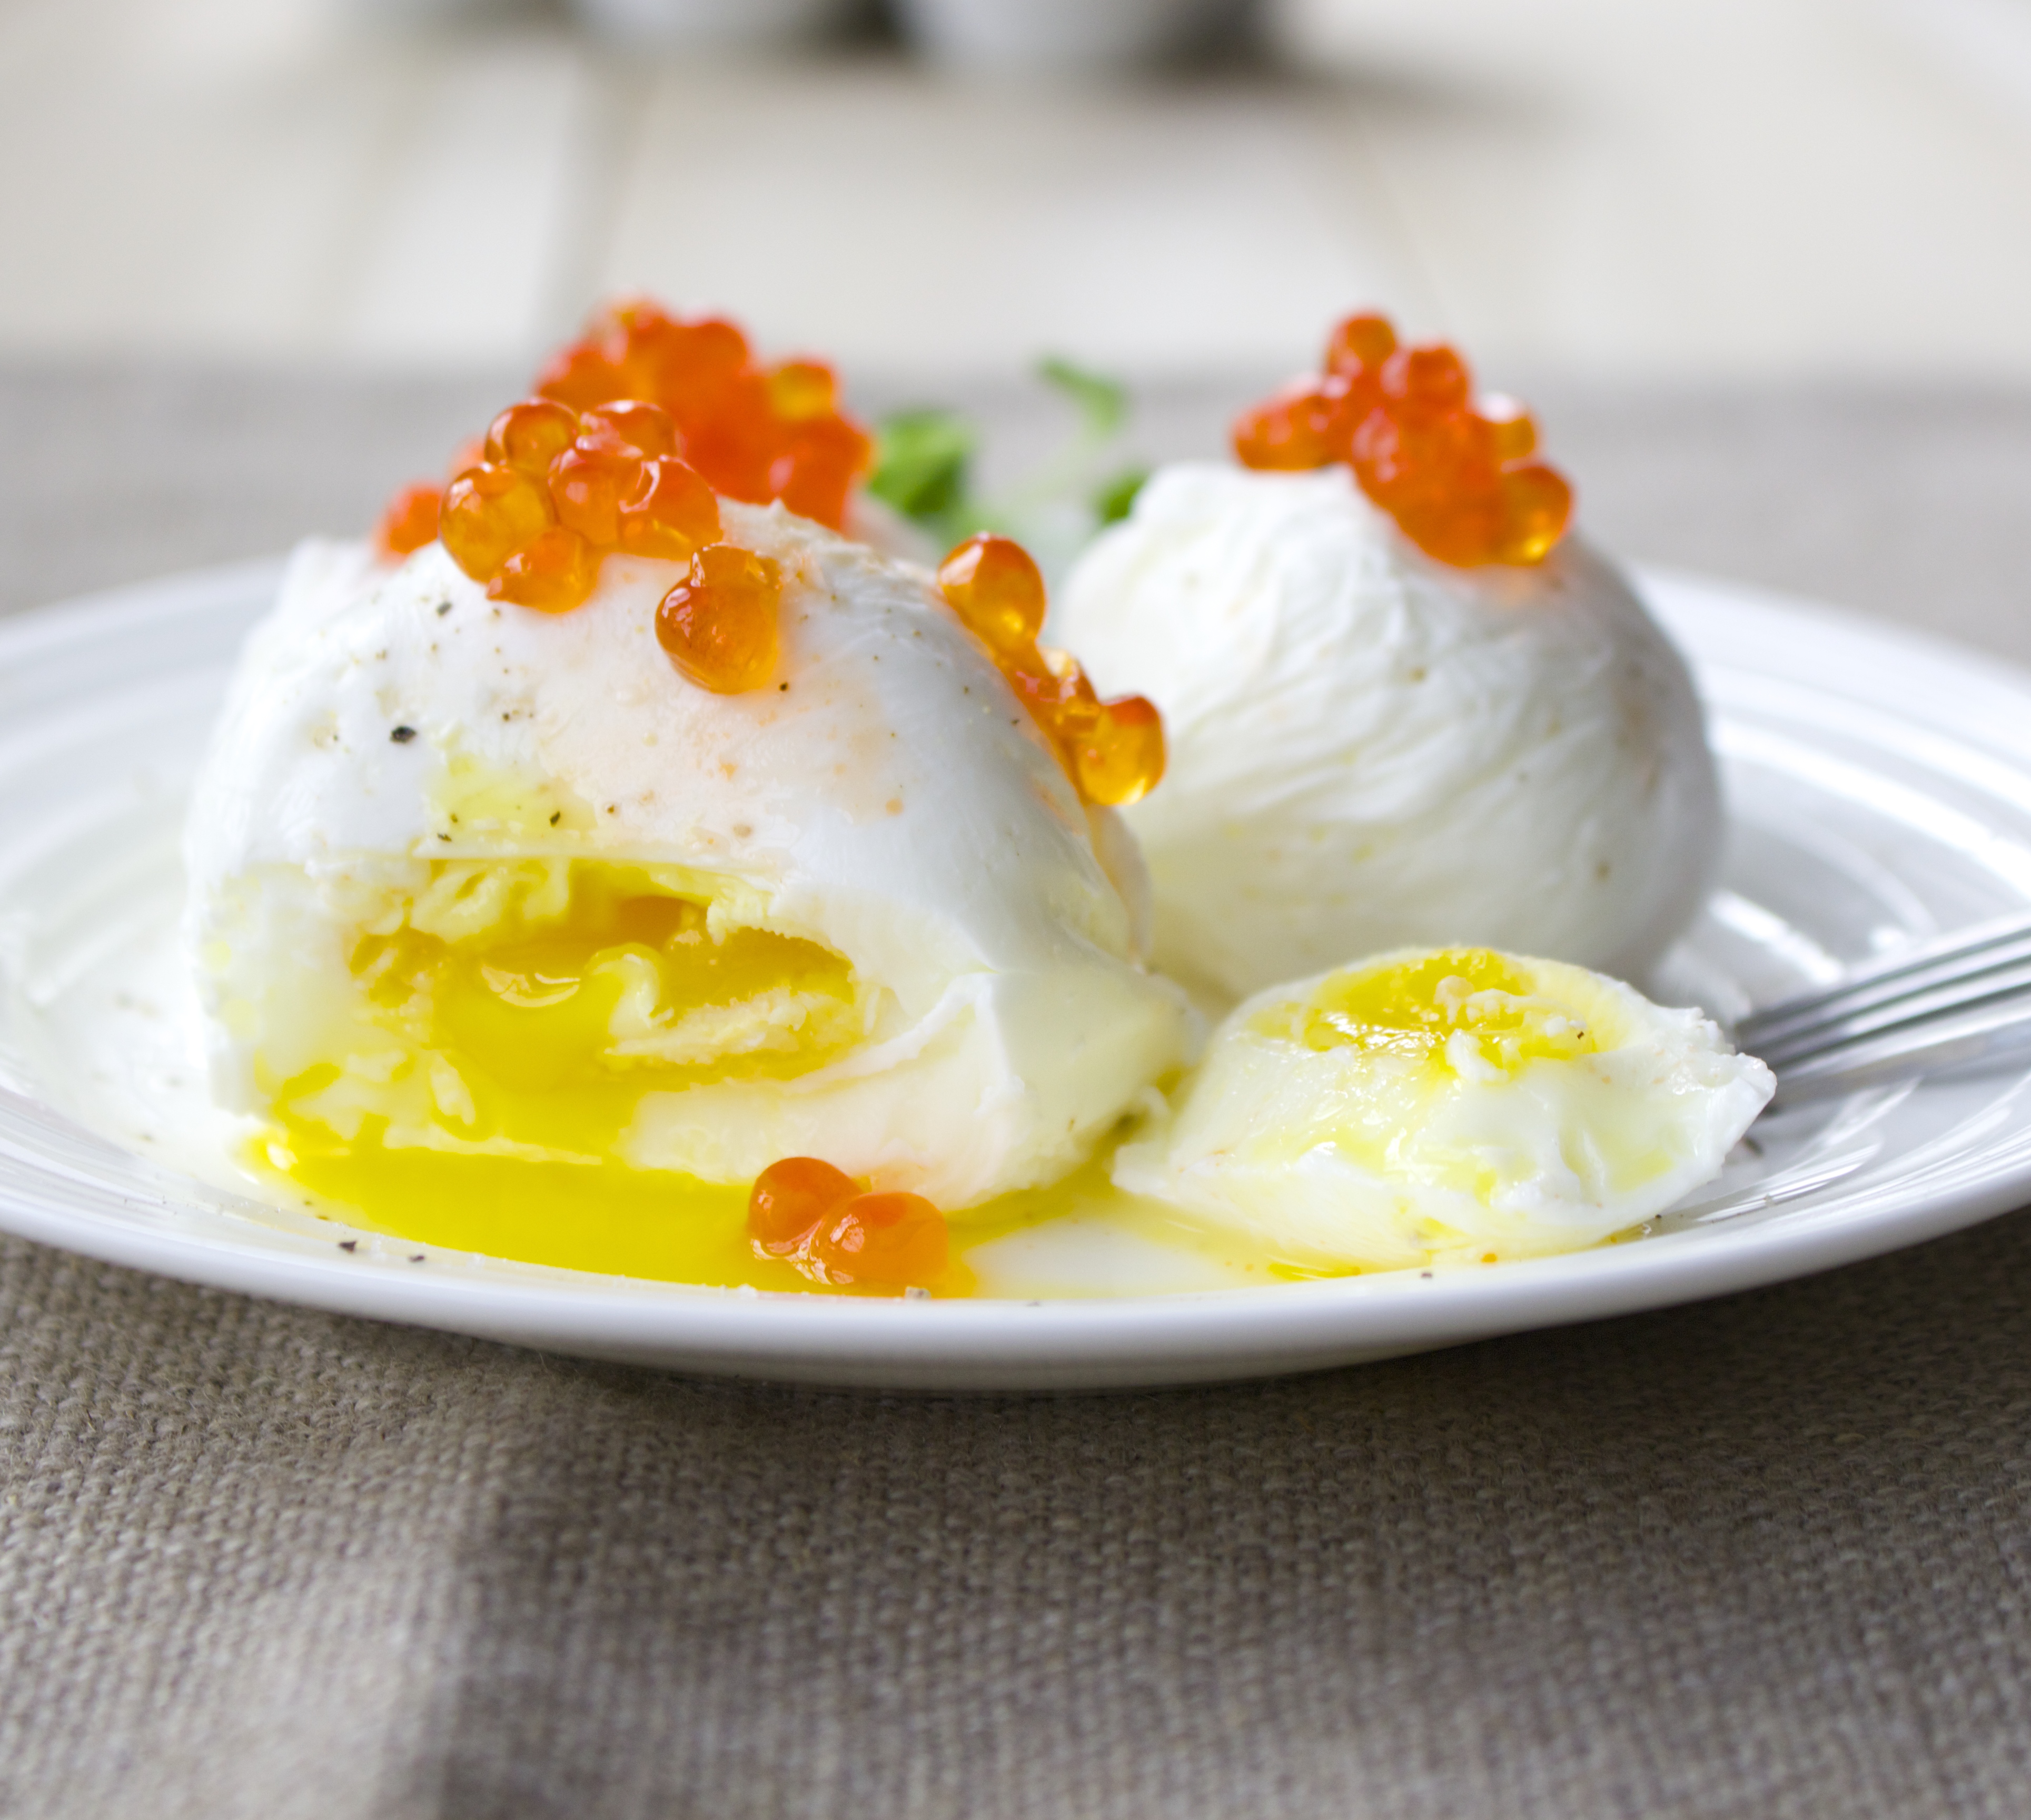 Poached Eggs with Salmon Roe | Beets & Bones